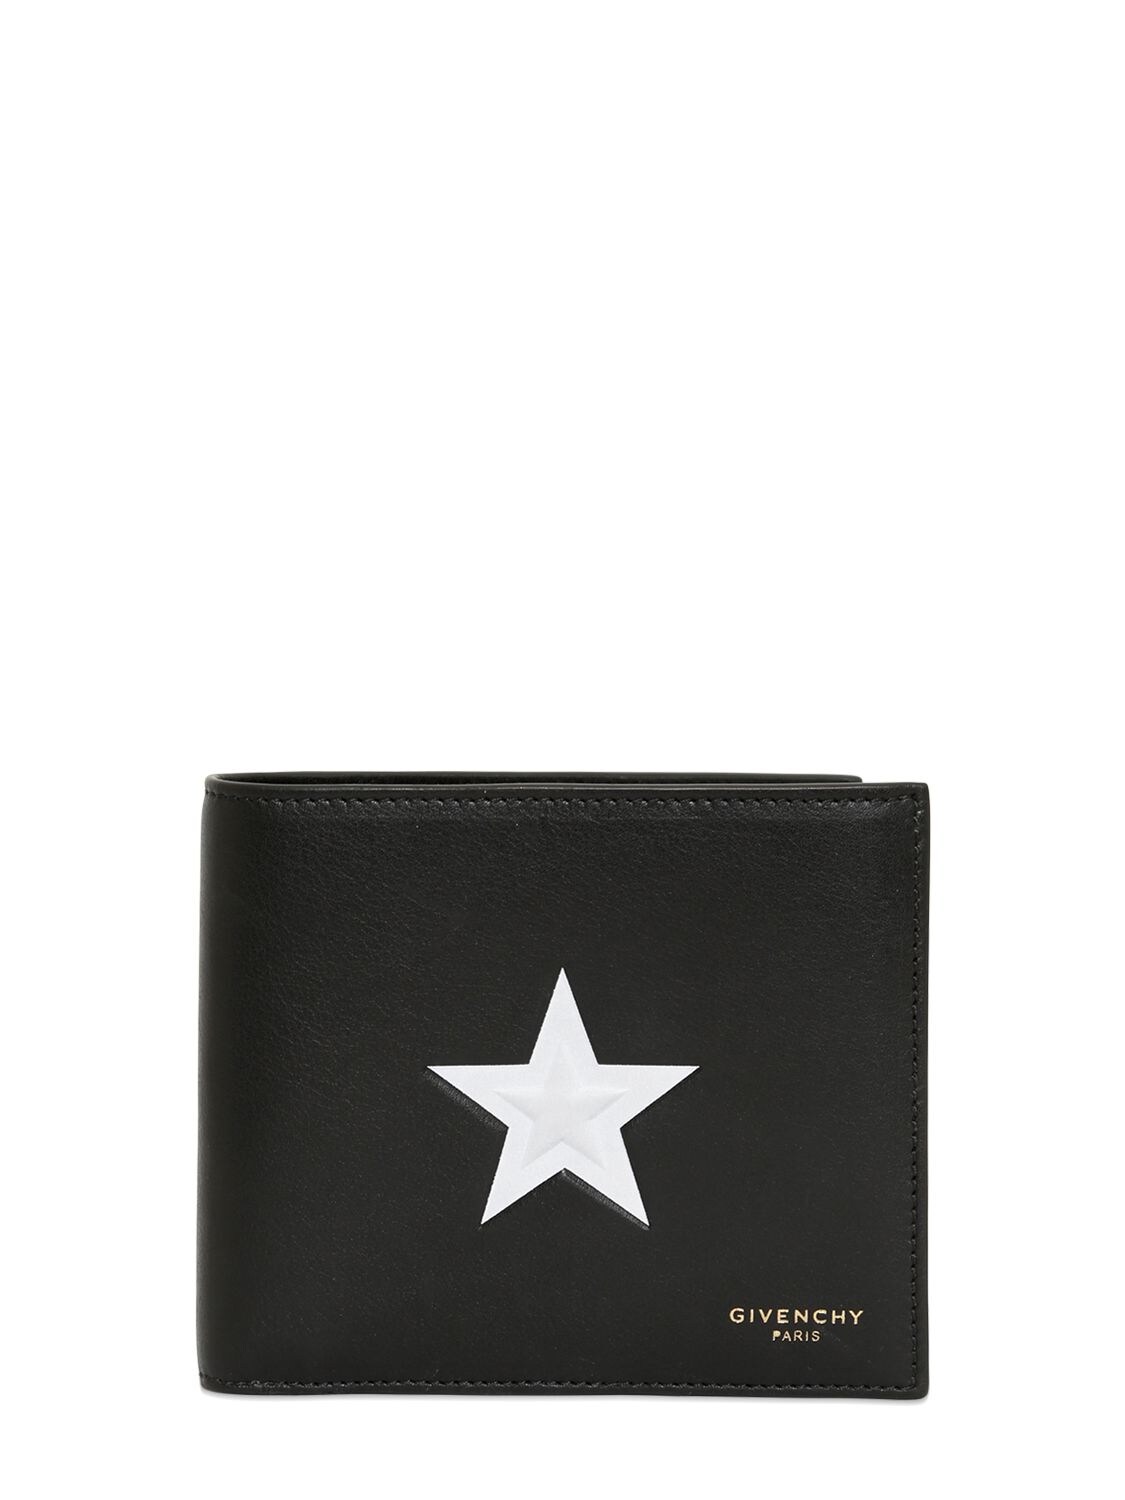 GIVENCHY EMBOSSED STAR CLASSIC WALLET,67ILBG012-MDAx0